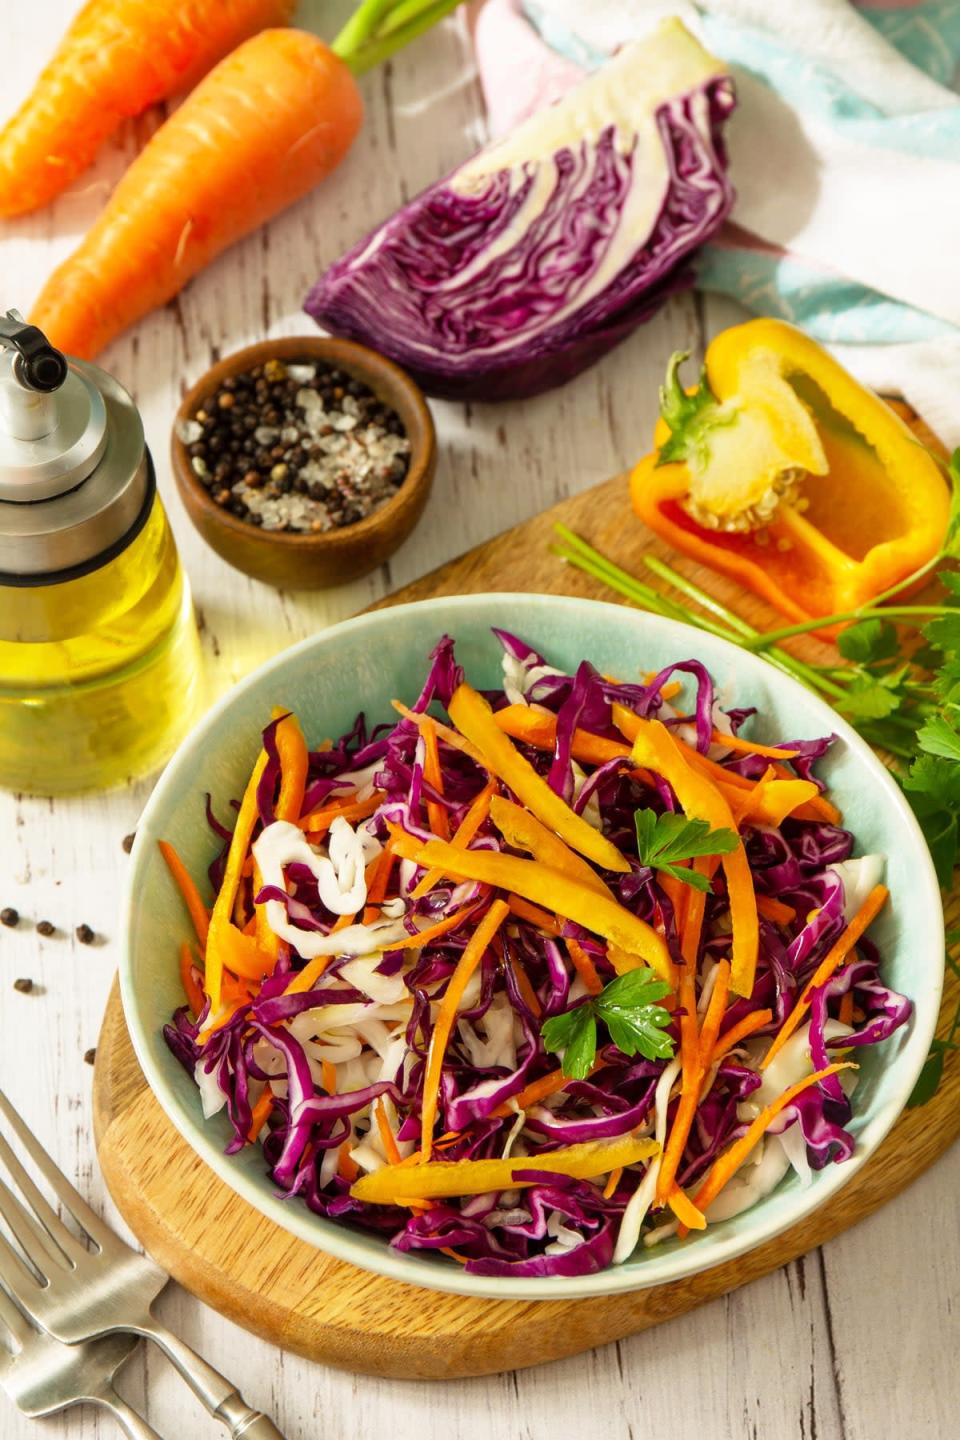 There is something intriguing about coleslaw with mangos (Getty/iStock)